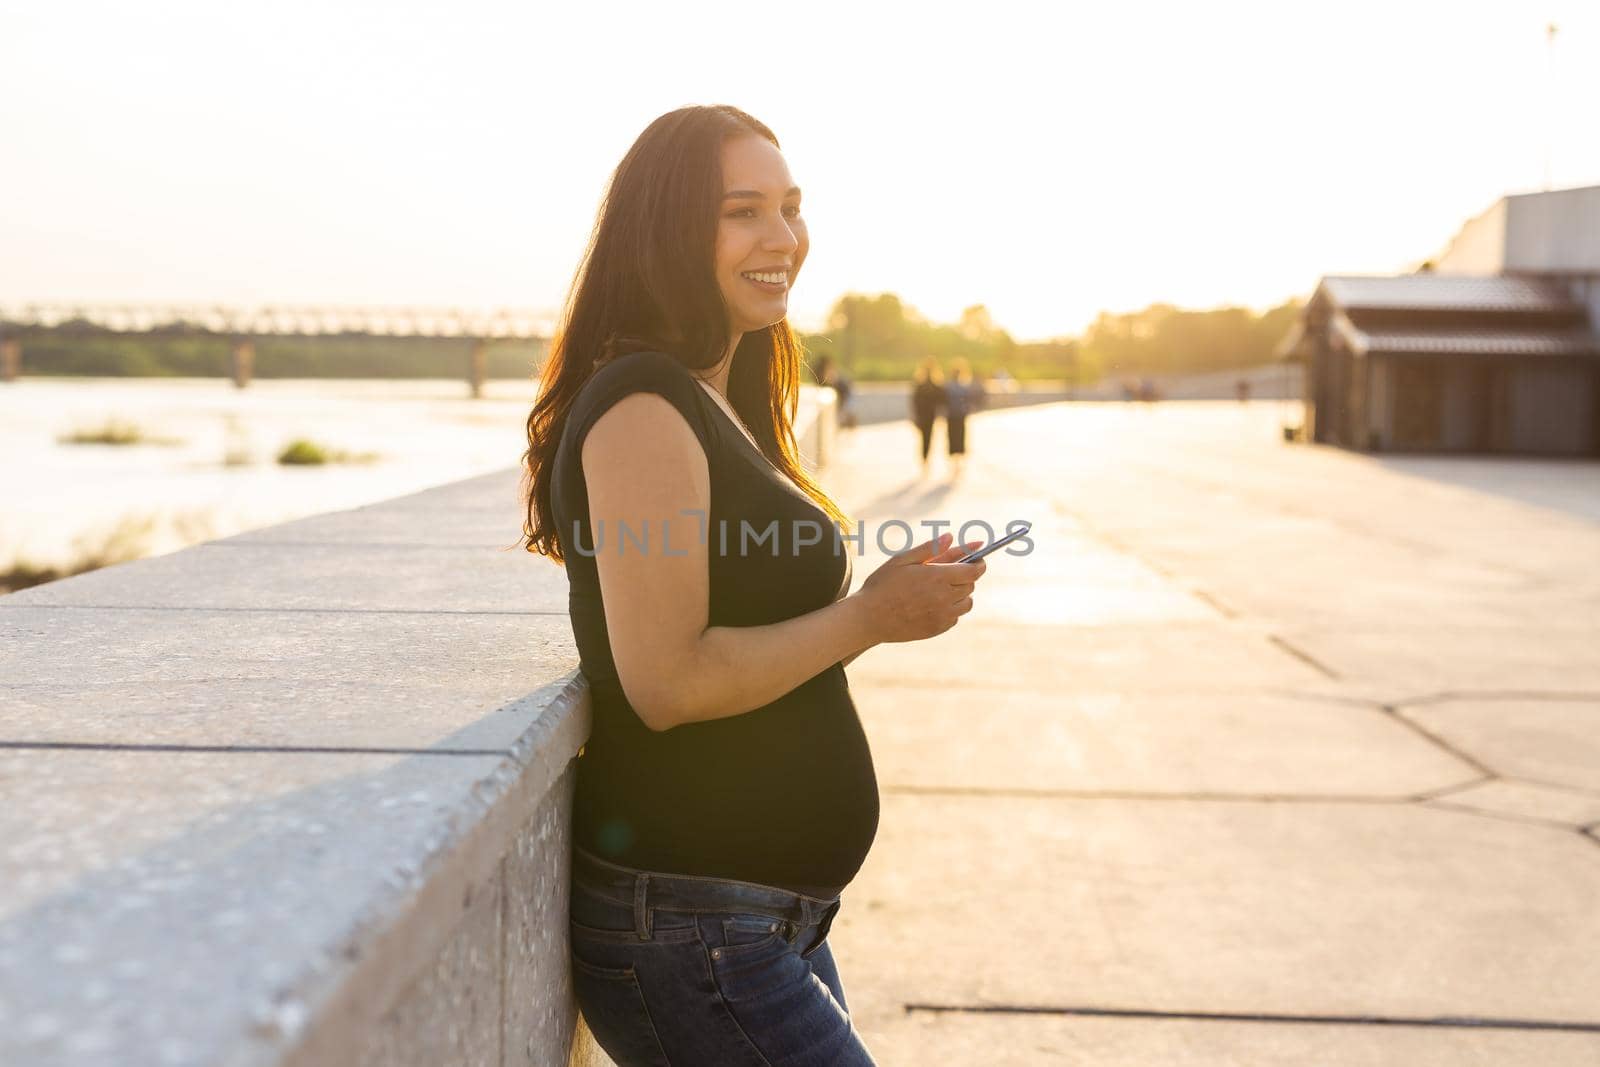 Pregnant woman with smartphone outdoors. Pregnancy, technology and communication concept by Satura86